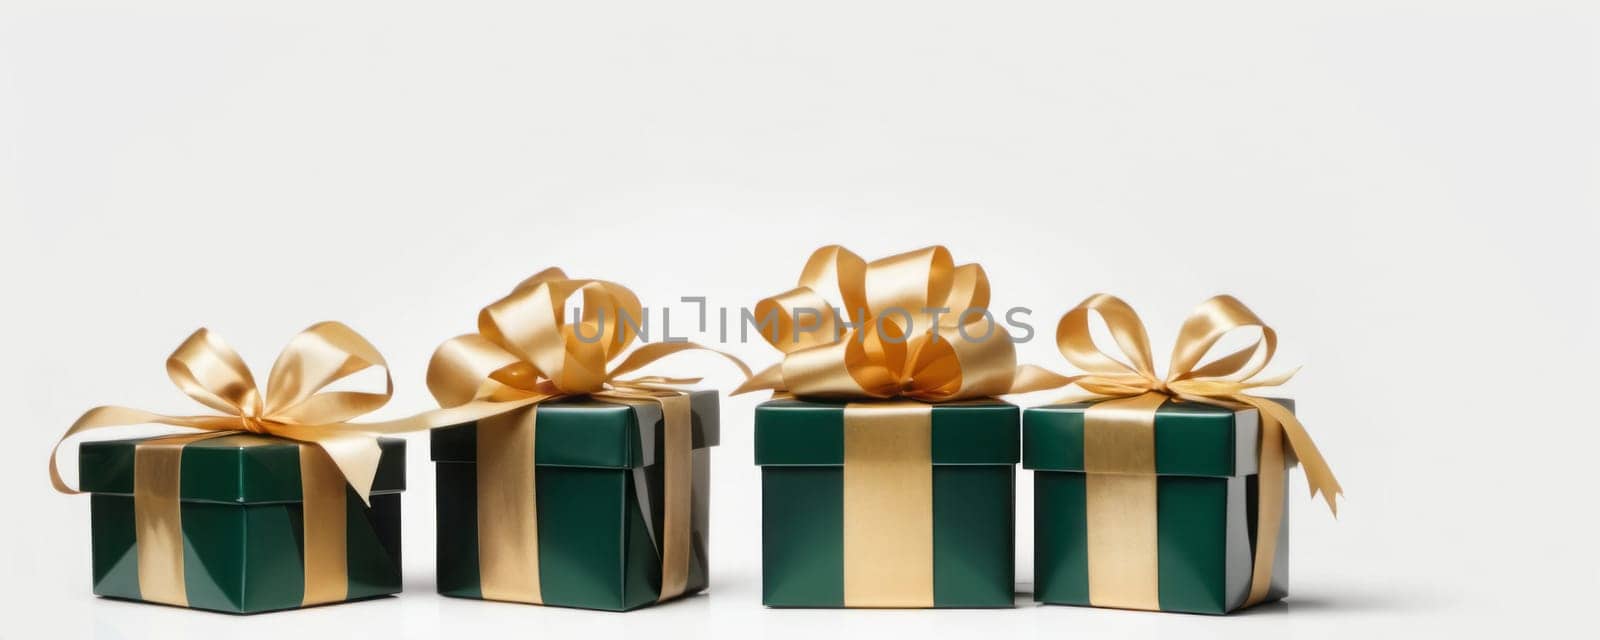 Luxurious Dark Green Gift Boxes with golden ribbons by nkotlyar